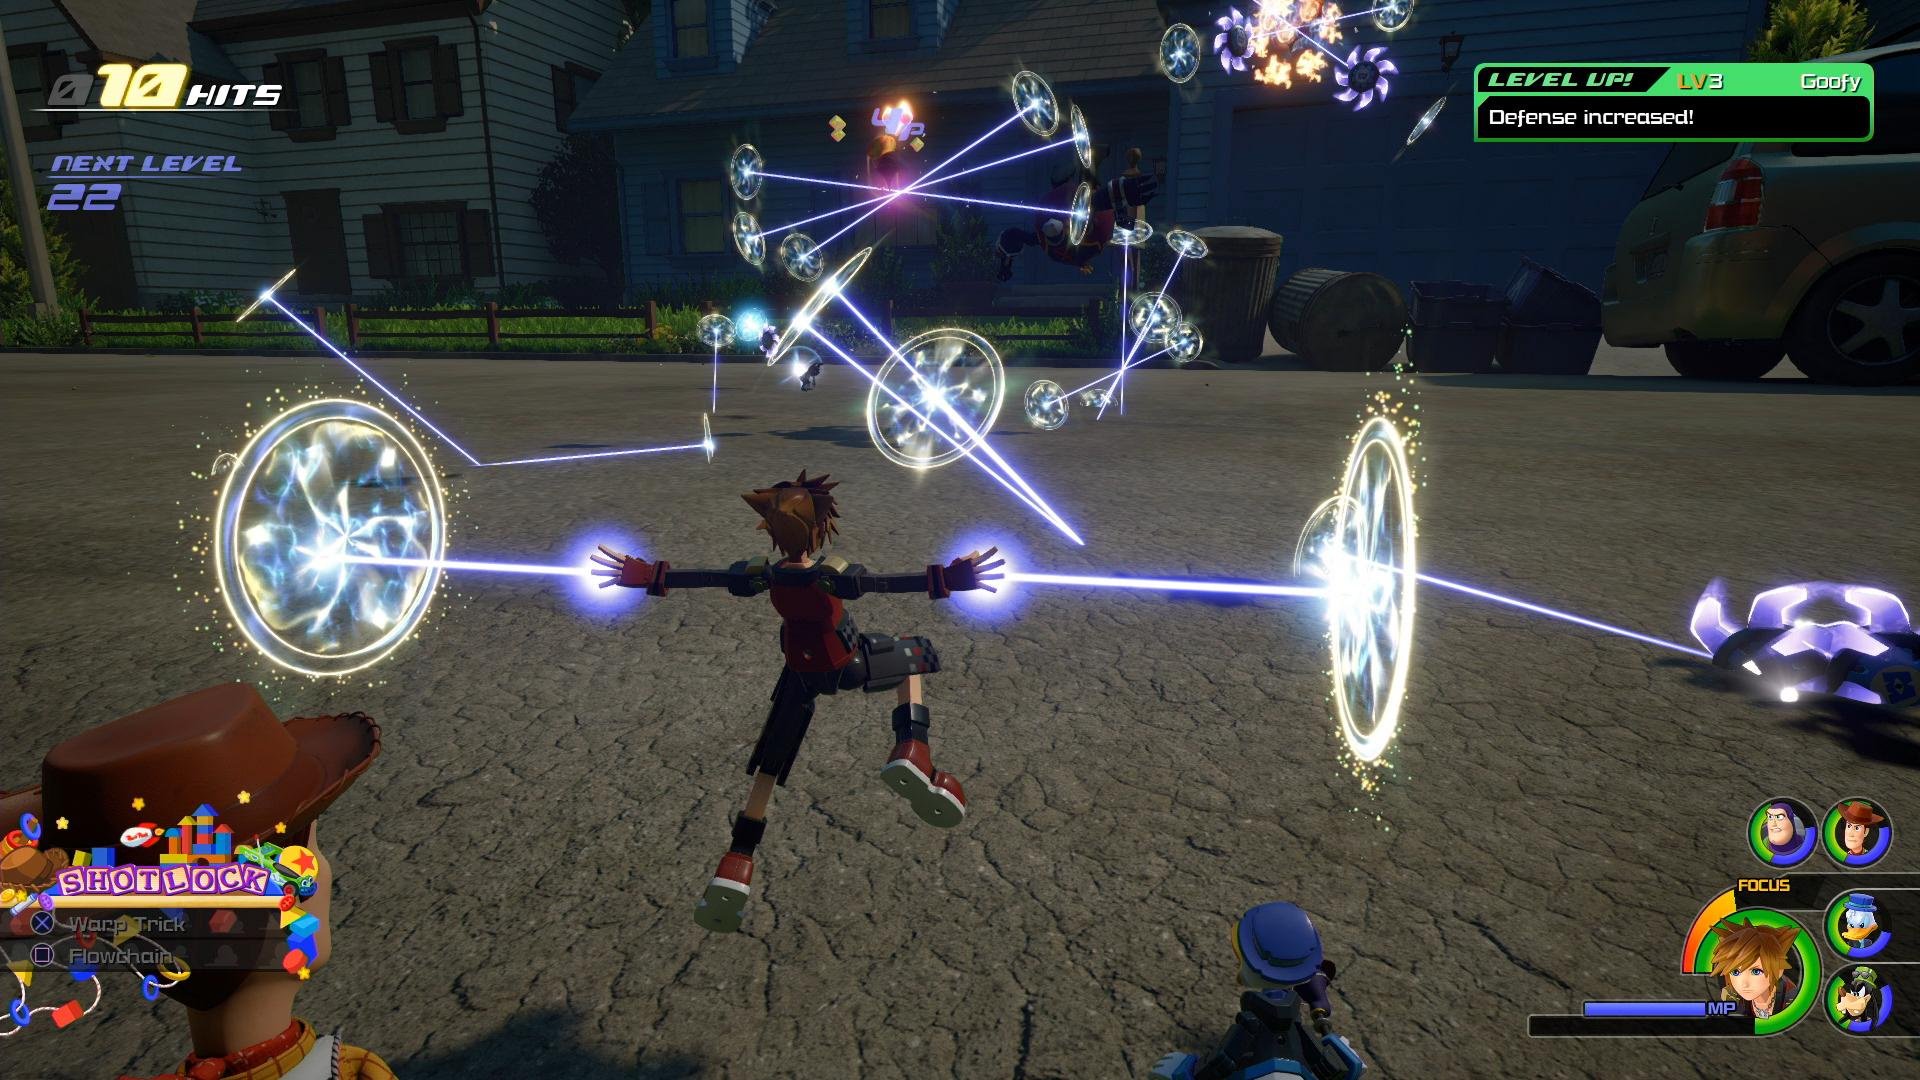 Kingdom Hearts III Review (PS4) - Hey Poor Player